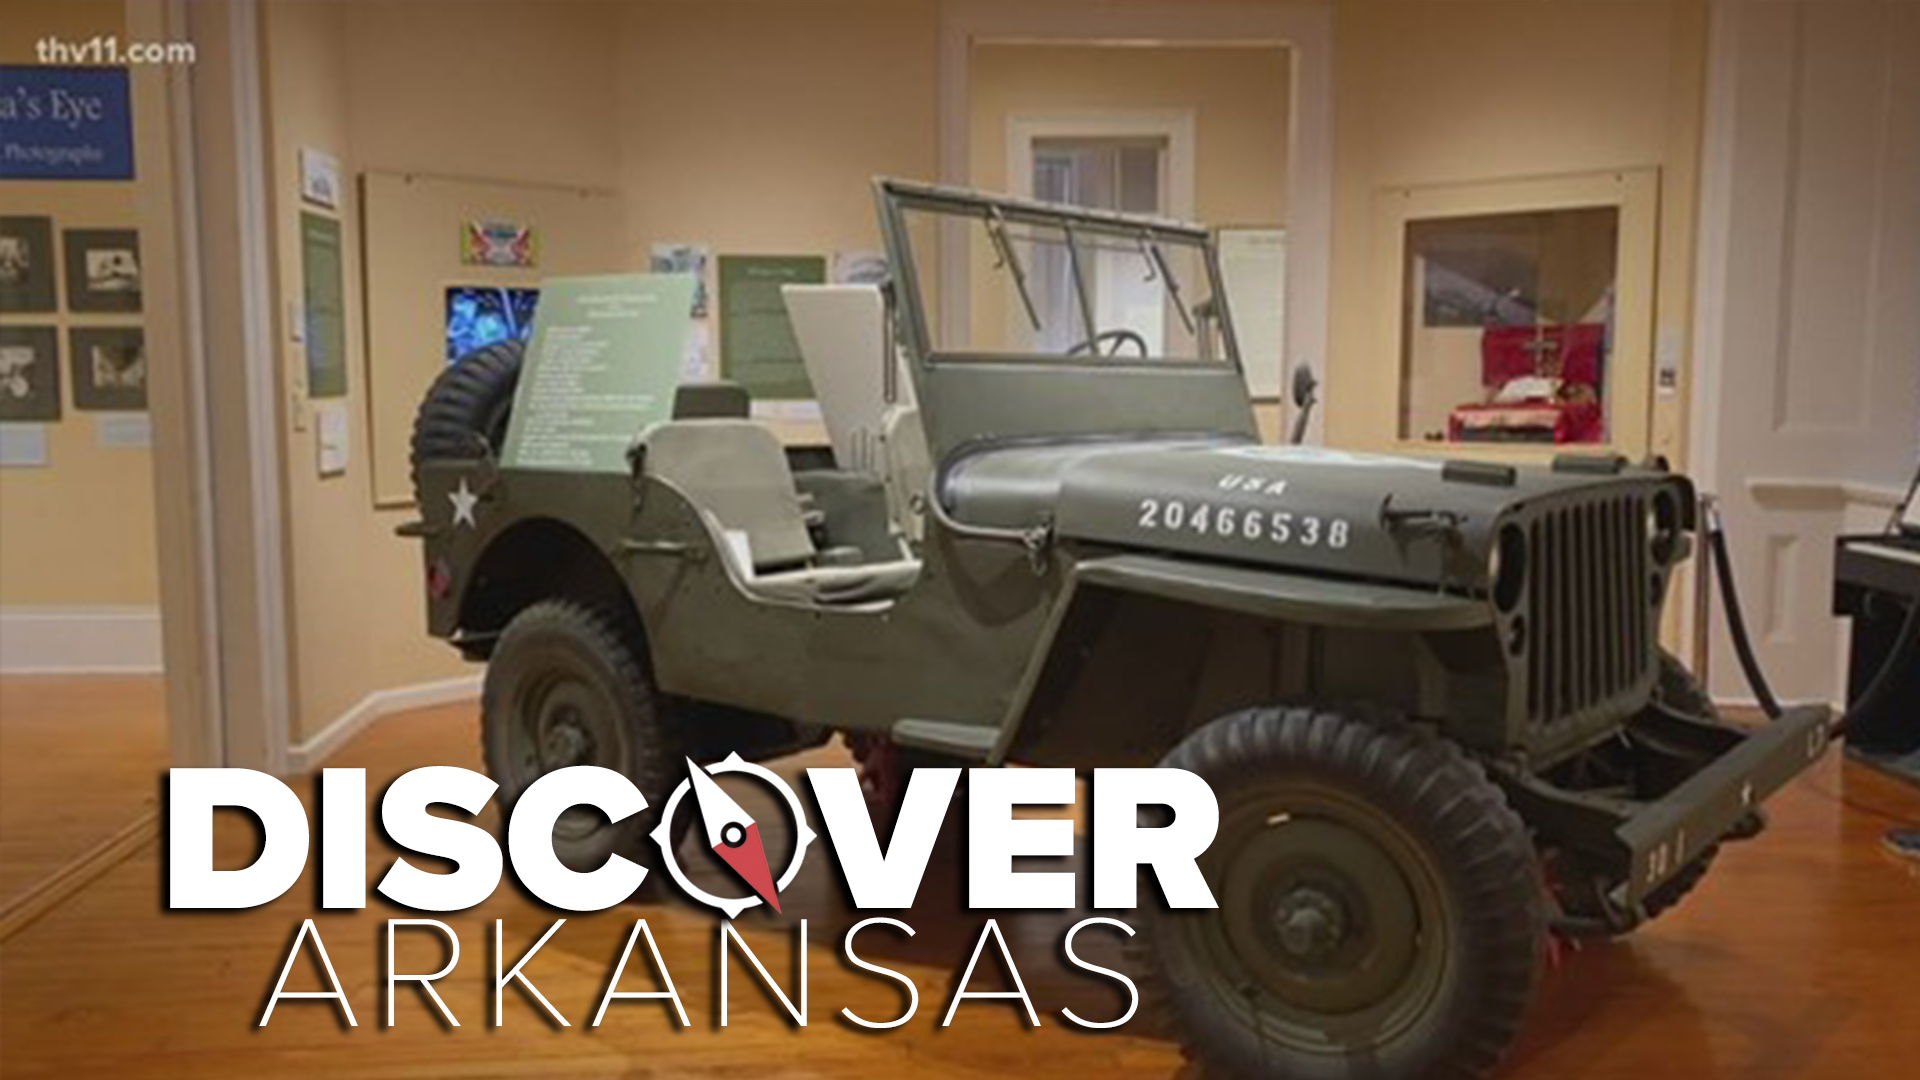 We're going inside one of the oldest buildings in Little Rock that houses much of Arkansas' miltary history.